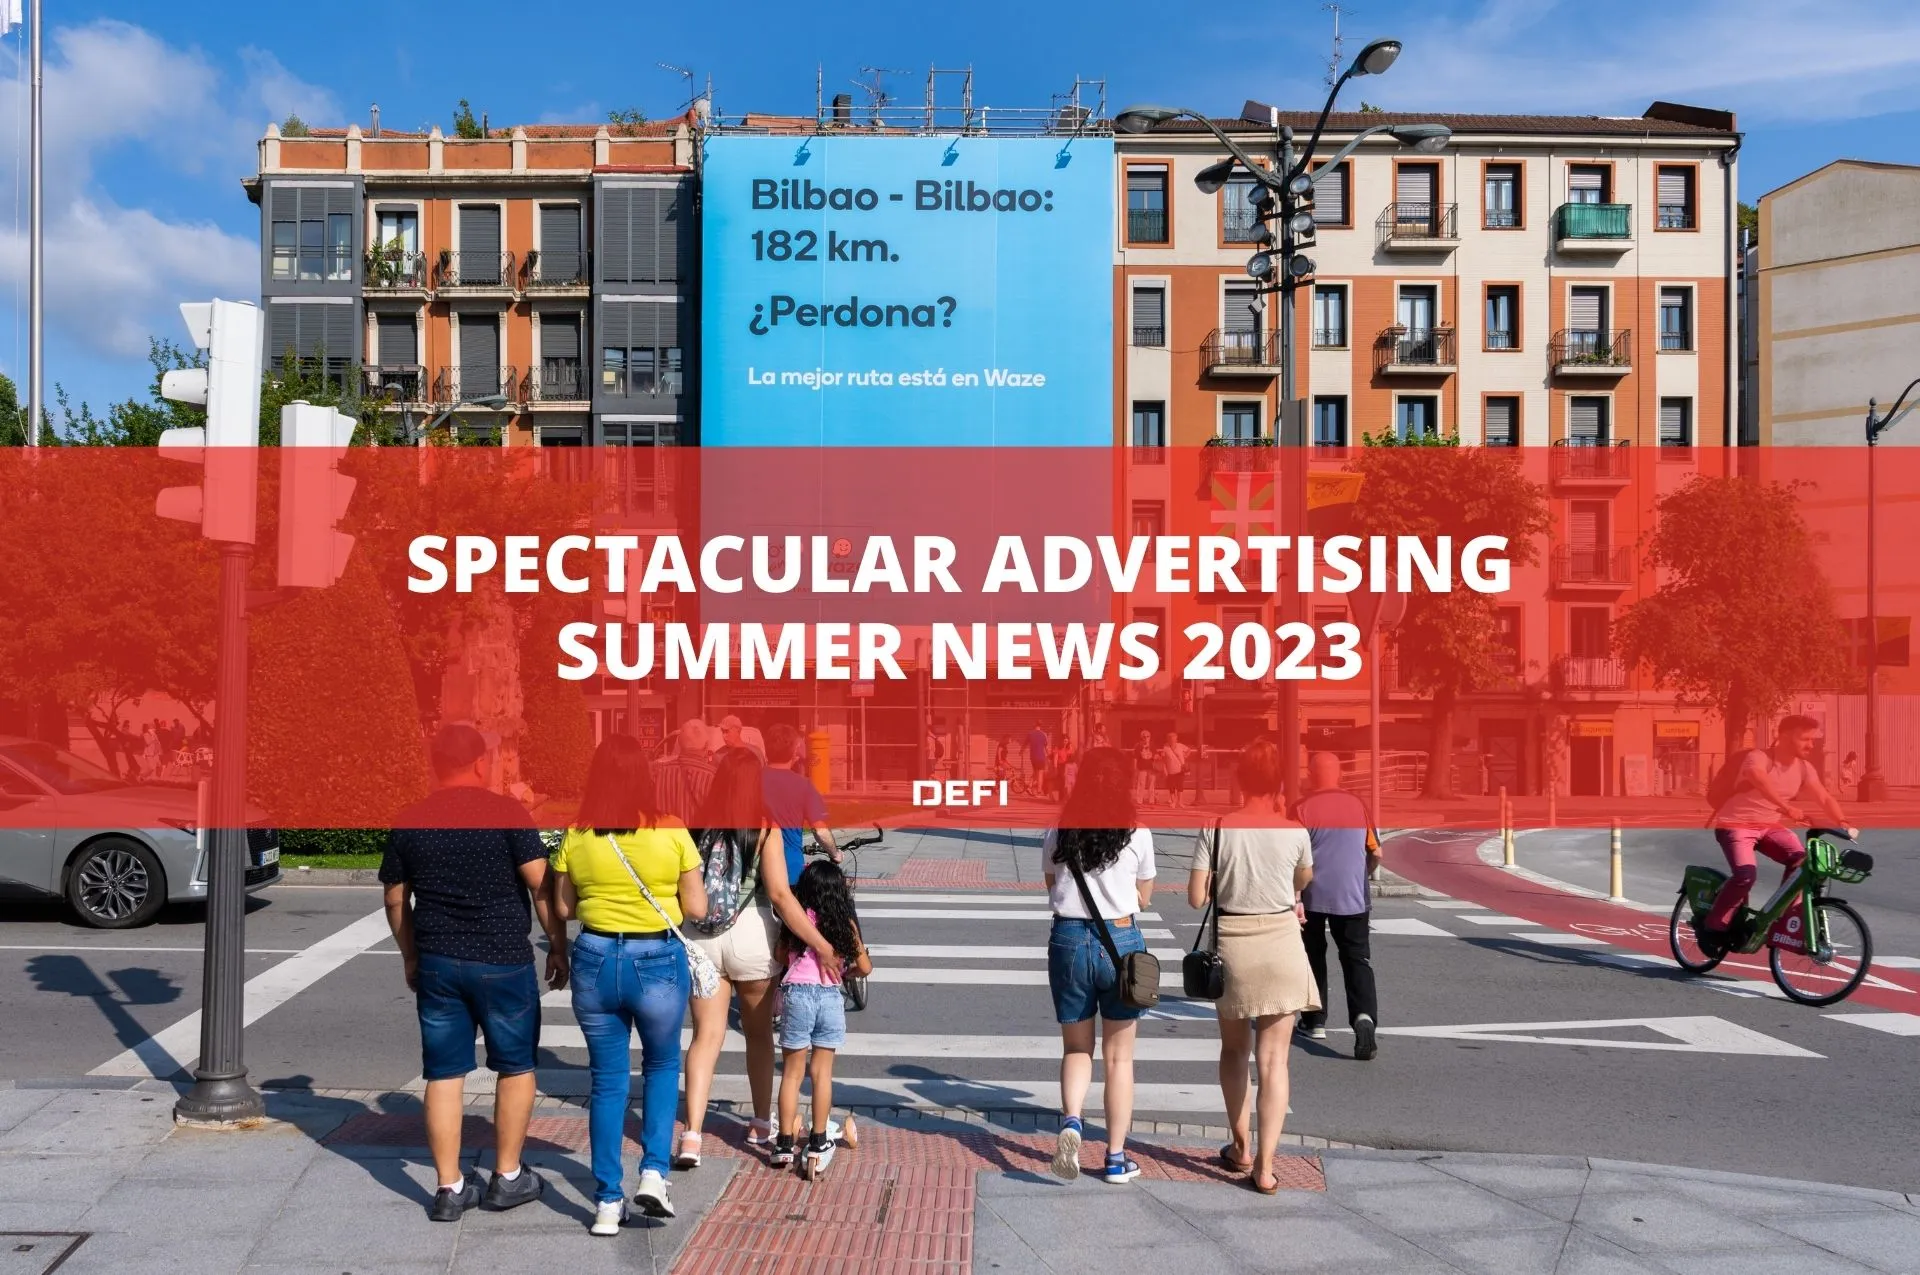 Thumbnail for spectacular advertising summer news 2023 article